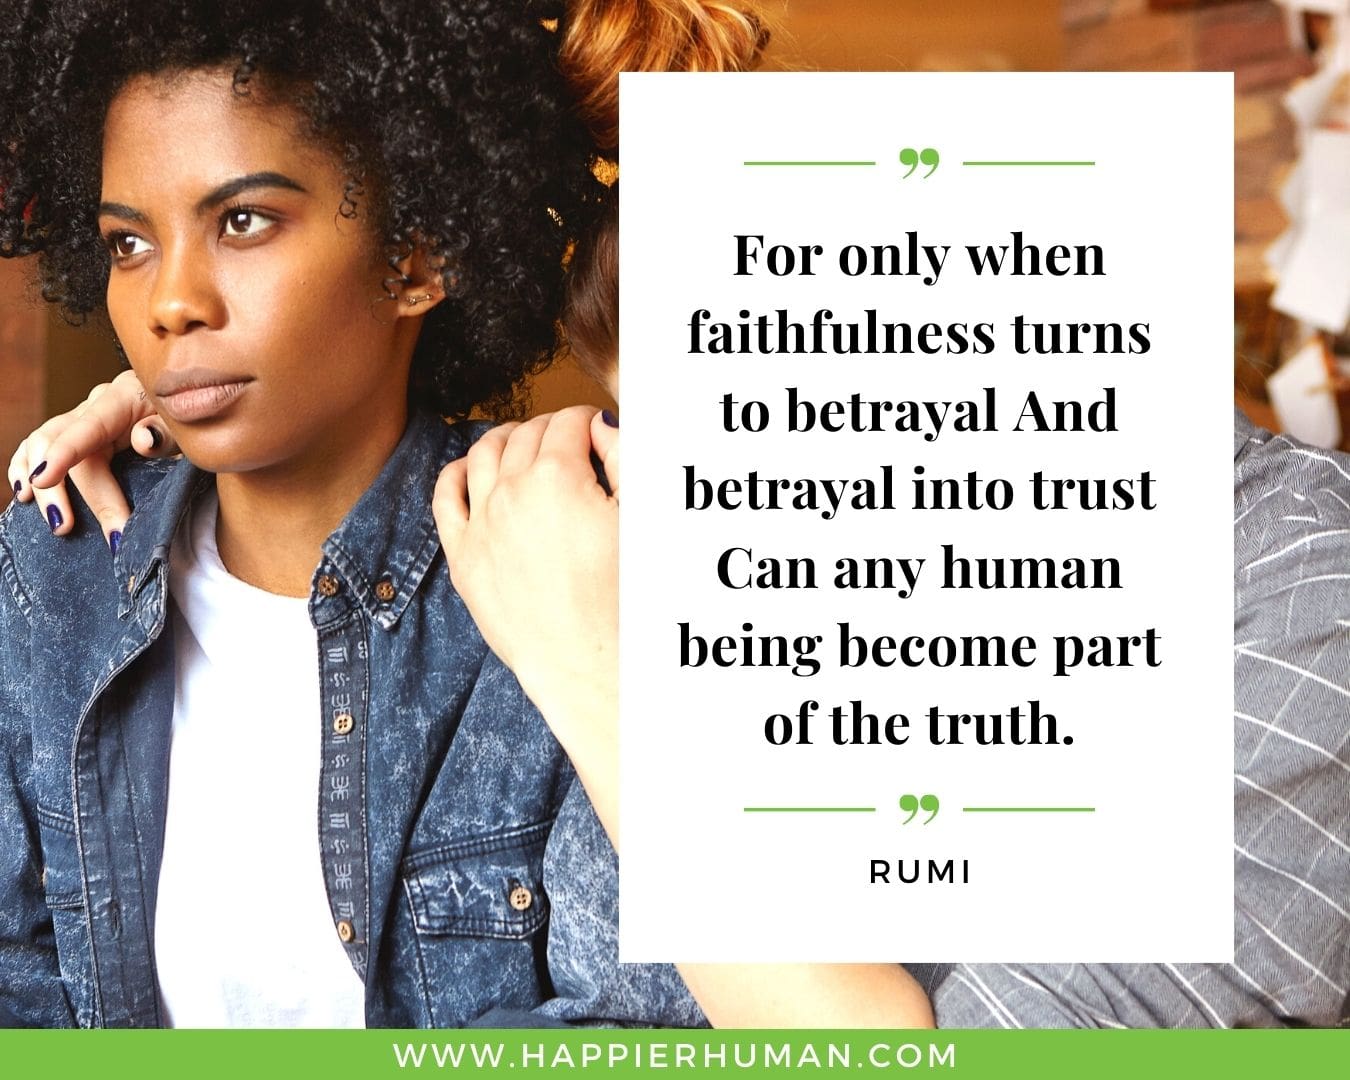 Broken Trust Quotes - “For only when faithfulness turns to betrayal And betrayal into trust Can any human being become part of the truth.” - Rumi